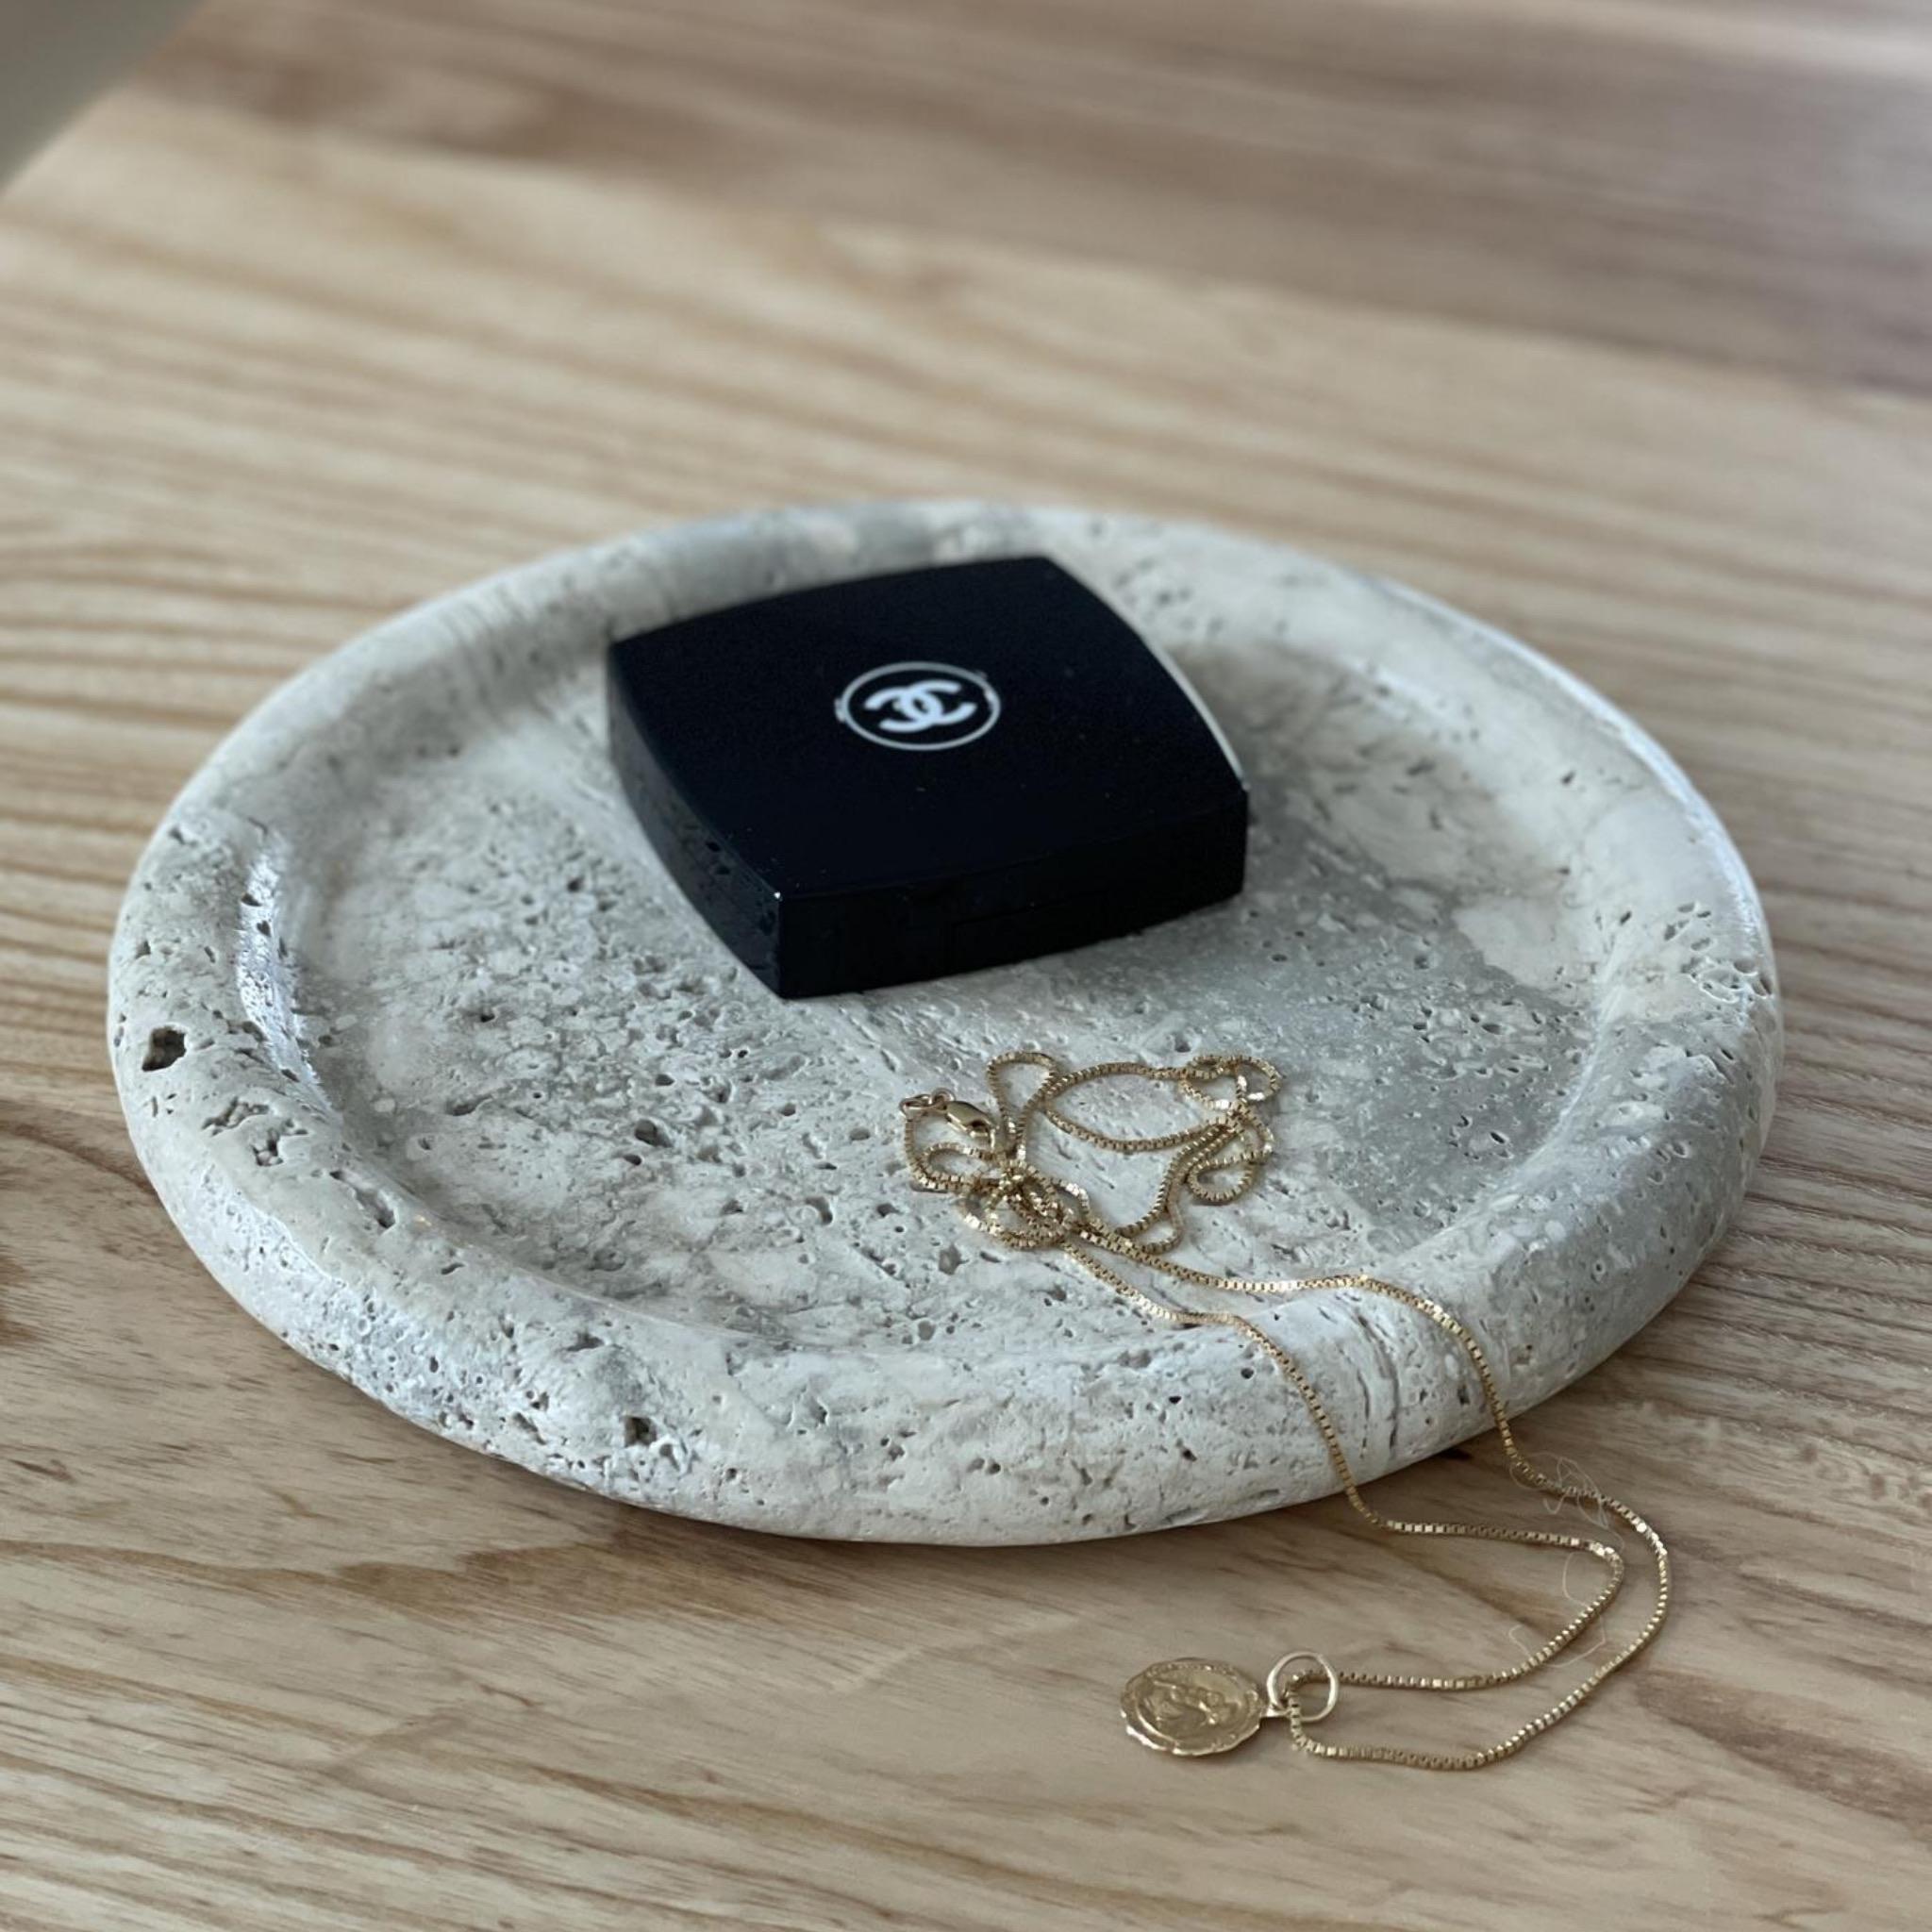 A limited production, functional object d'art exclusively produced by Anastasio Home.

The Wish is a minimal, eight-inch round dish cut from a single piece of solid marble or stone with a medium “puff” border, hand-finished by artisans in a